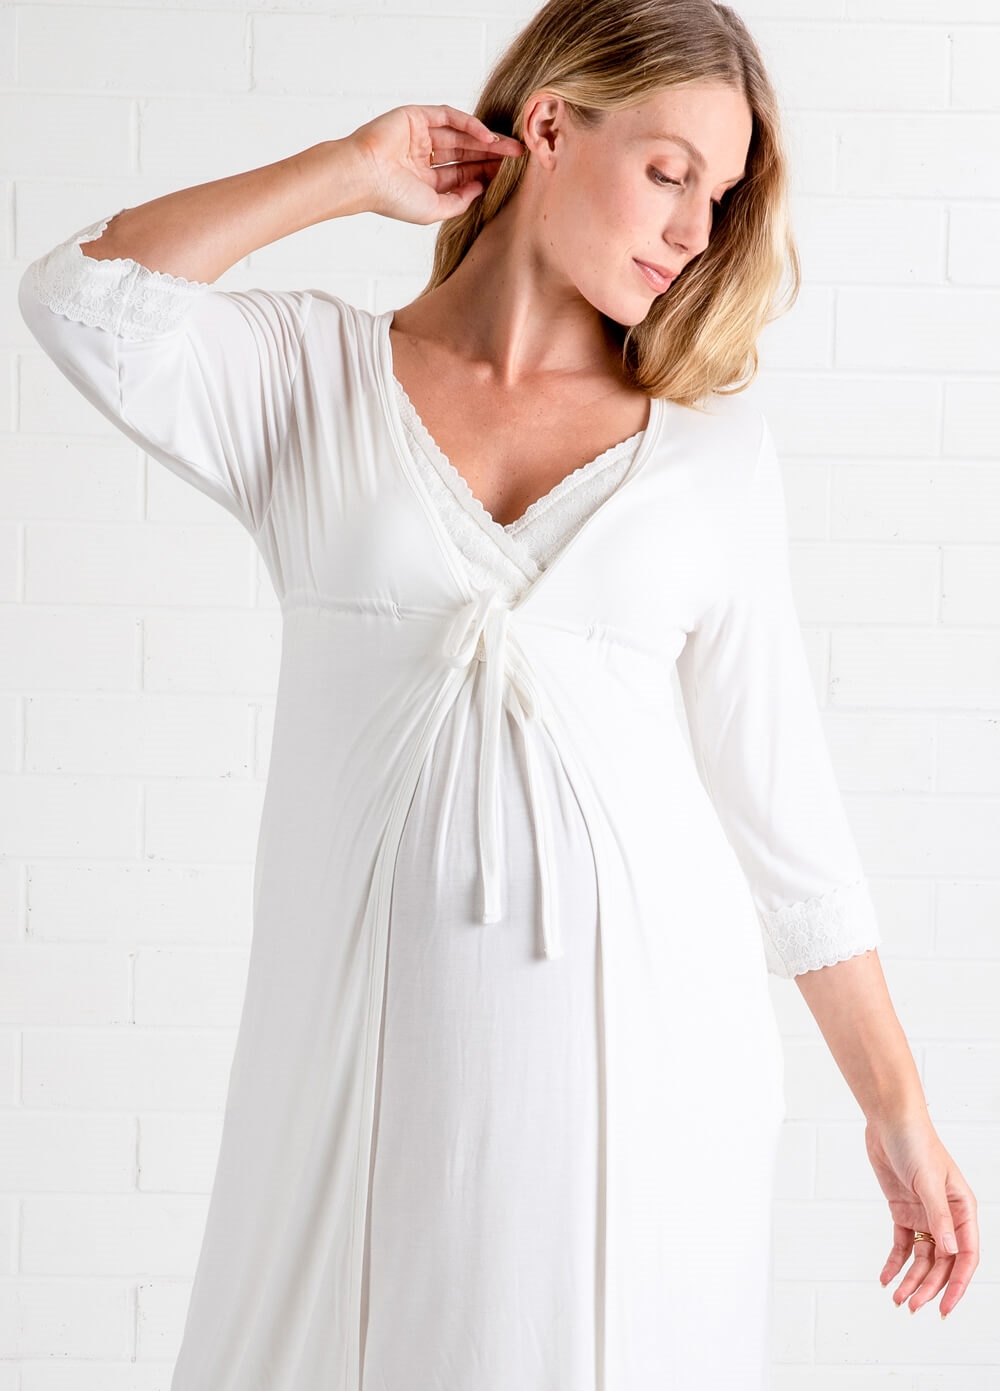 Lait & Co - Moselle Ivory Maternity Robe | Queen Bee